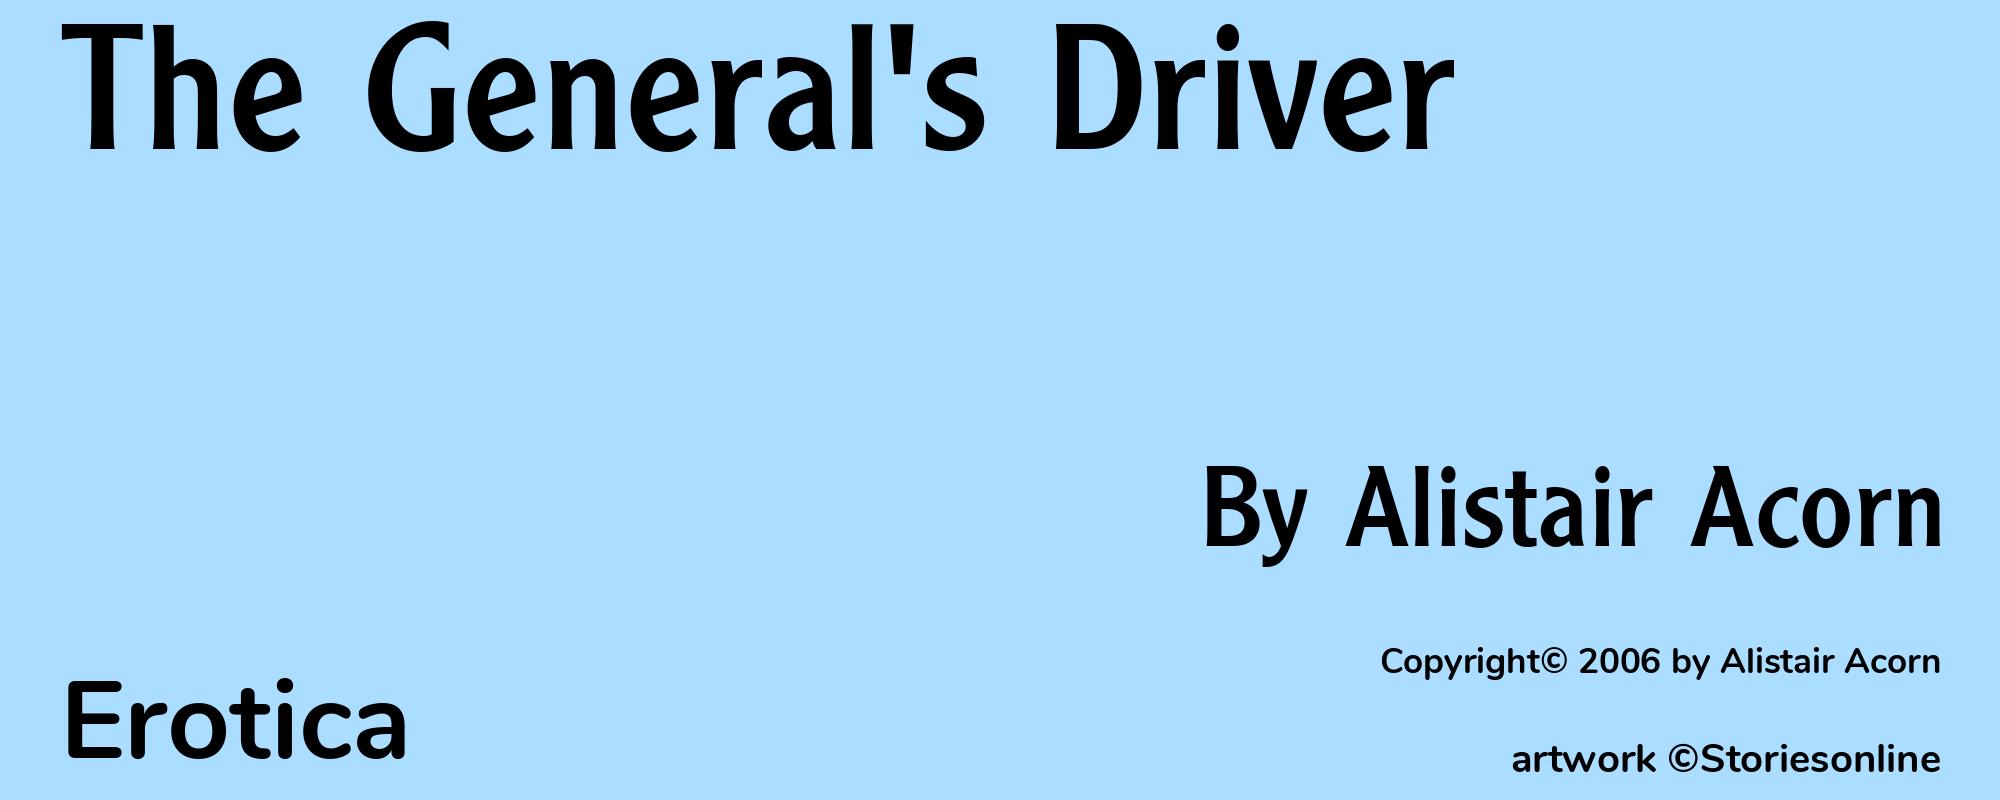 The General's Driver - Cover